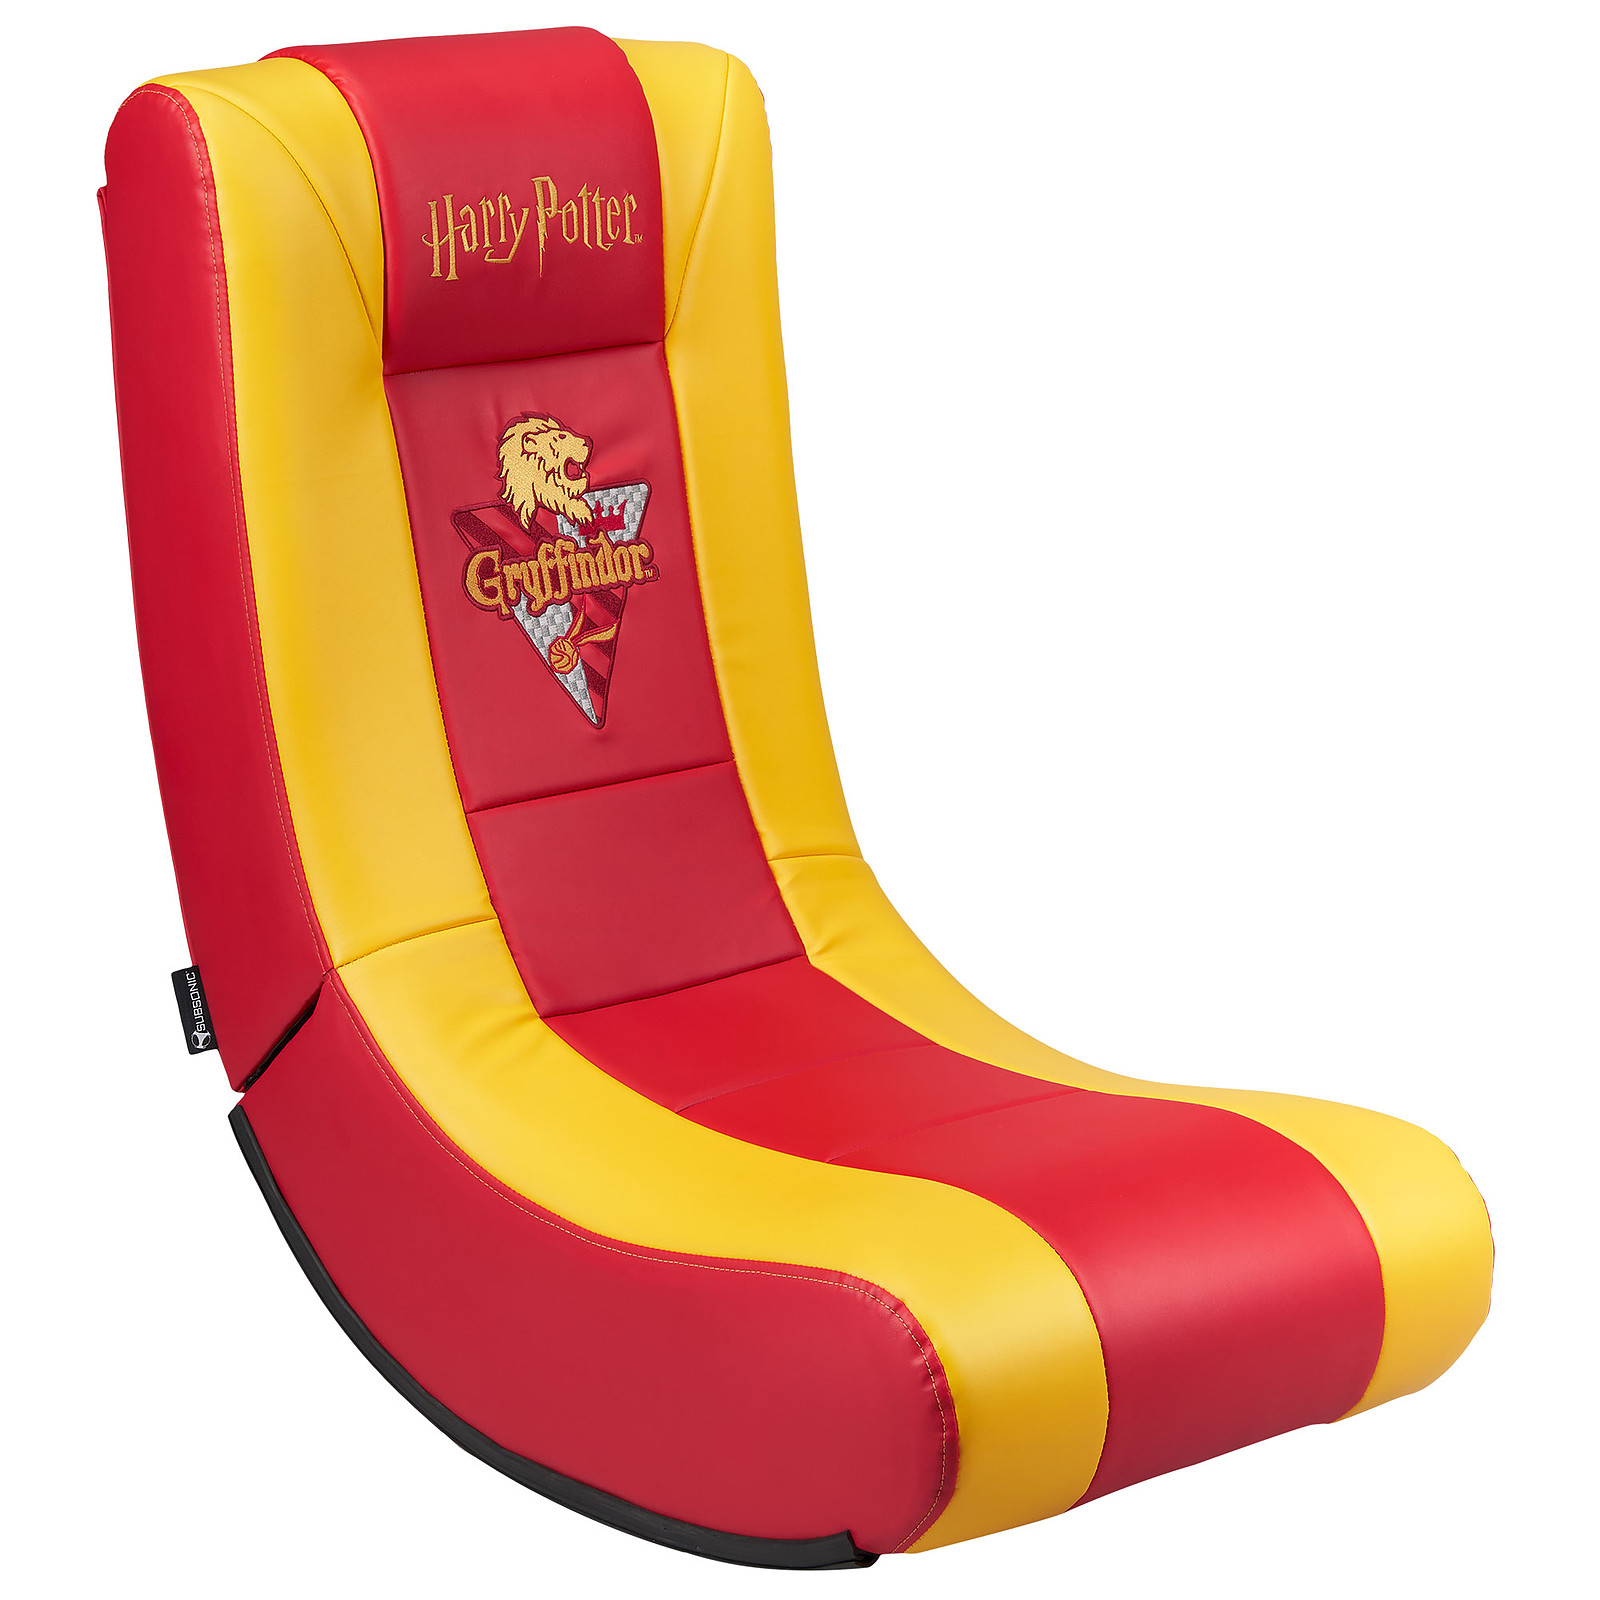 Subsonic Fauteuil Rock'N'Seat Harry Potter Junior - Fauteuil gamer Subsonic